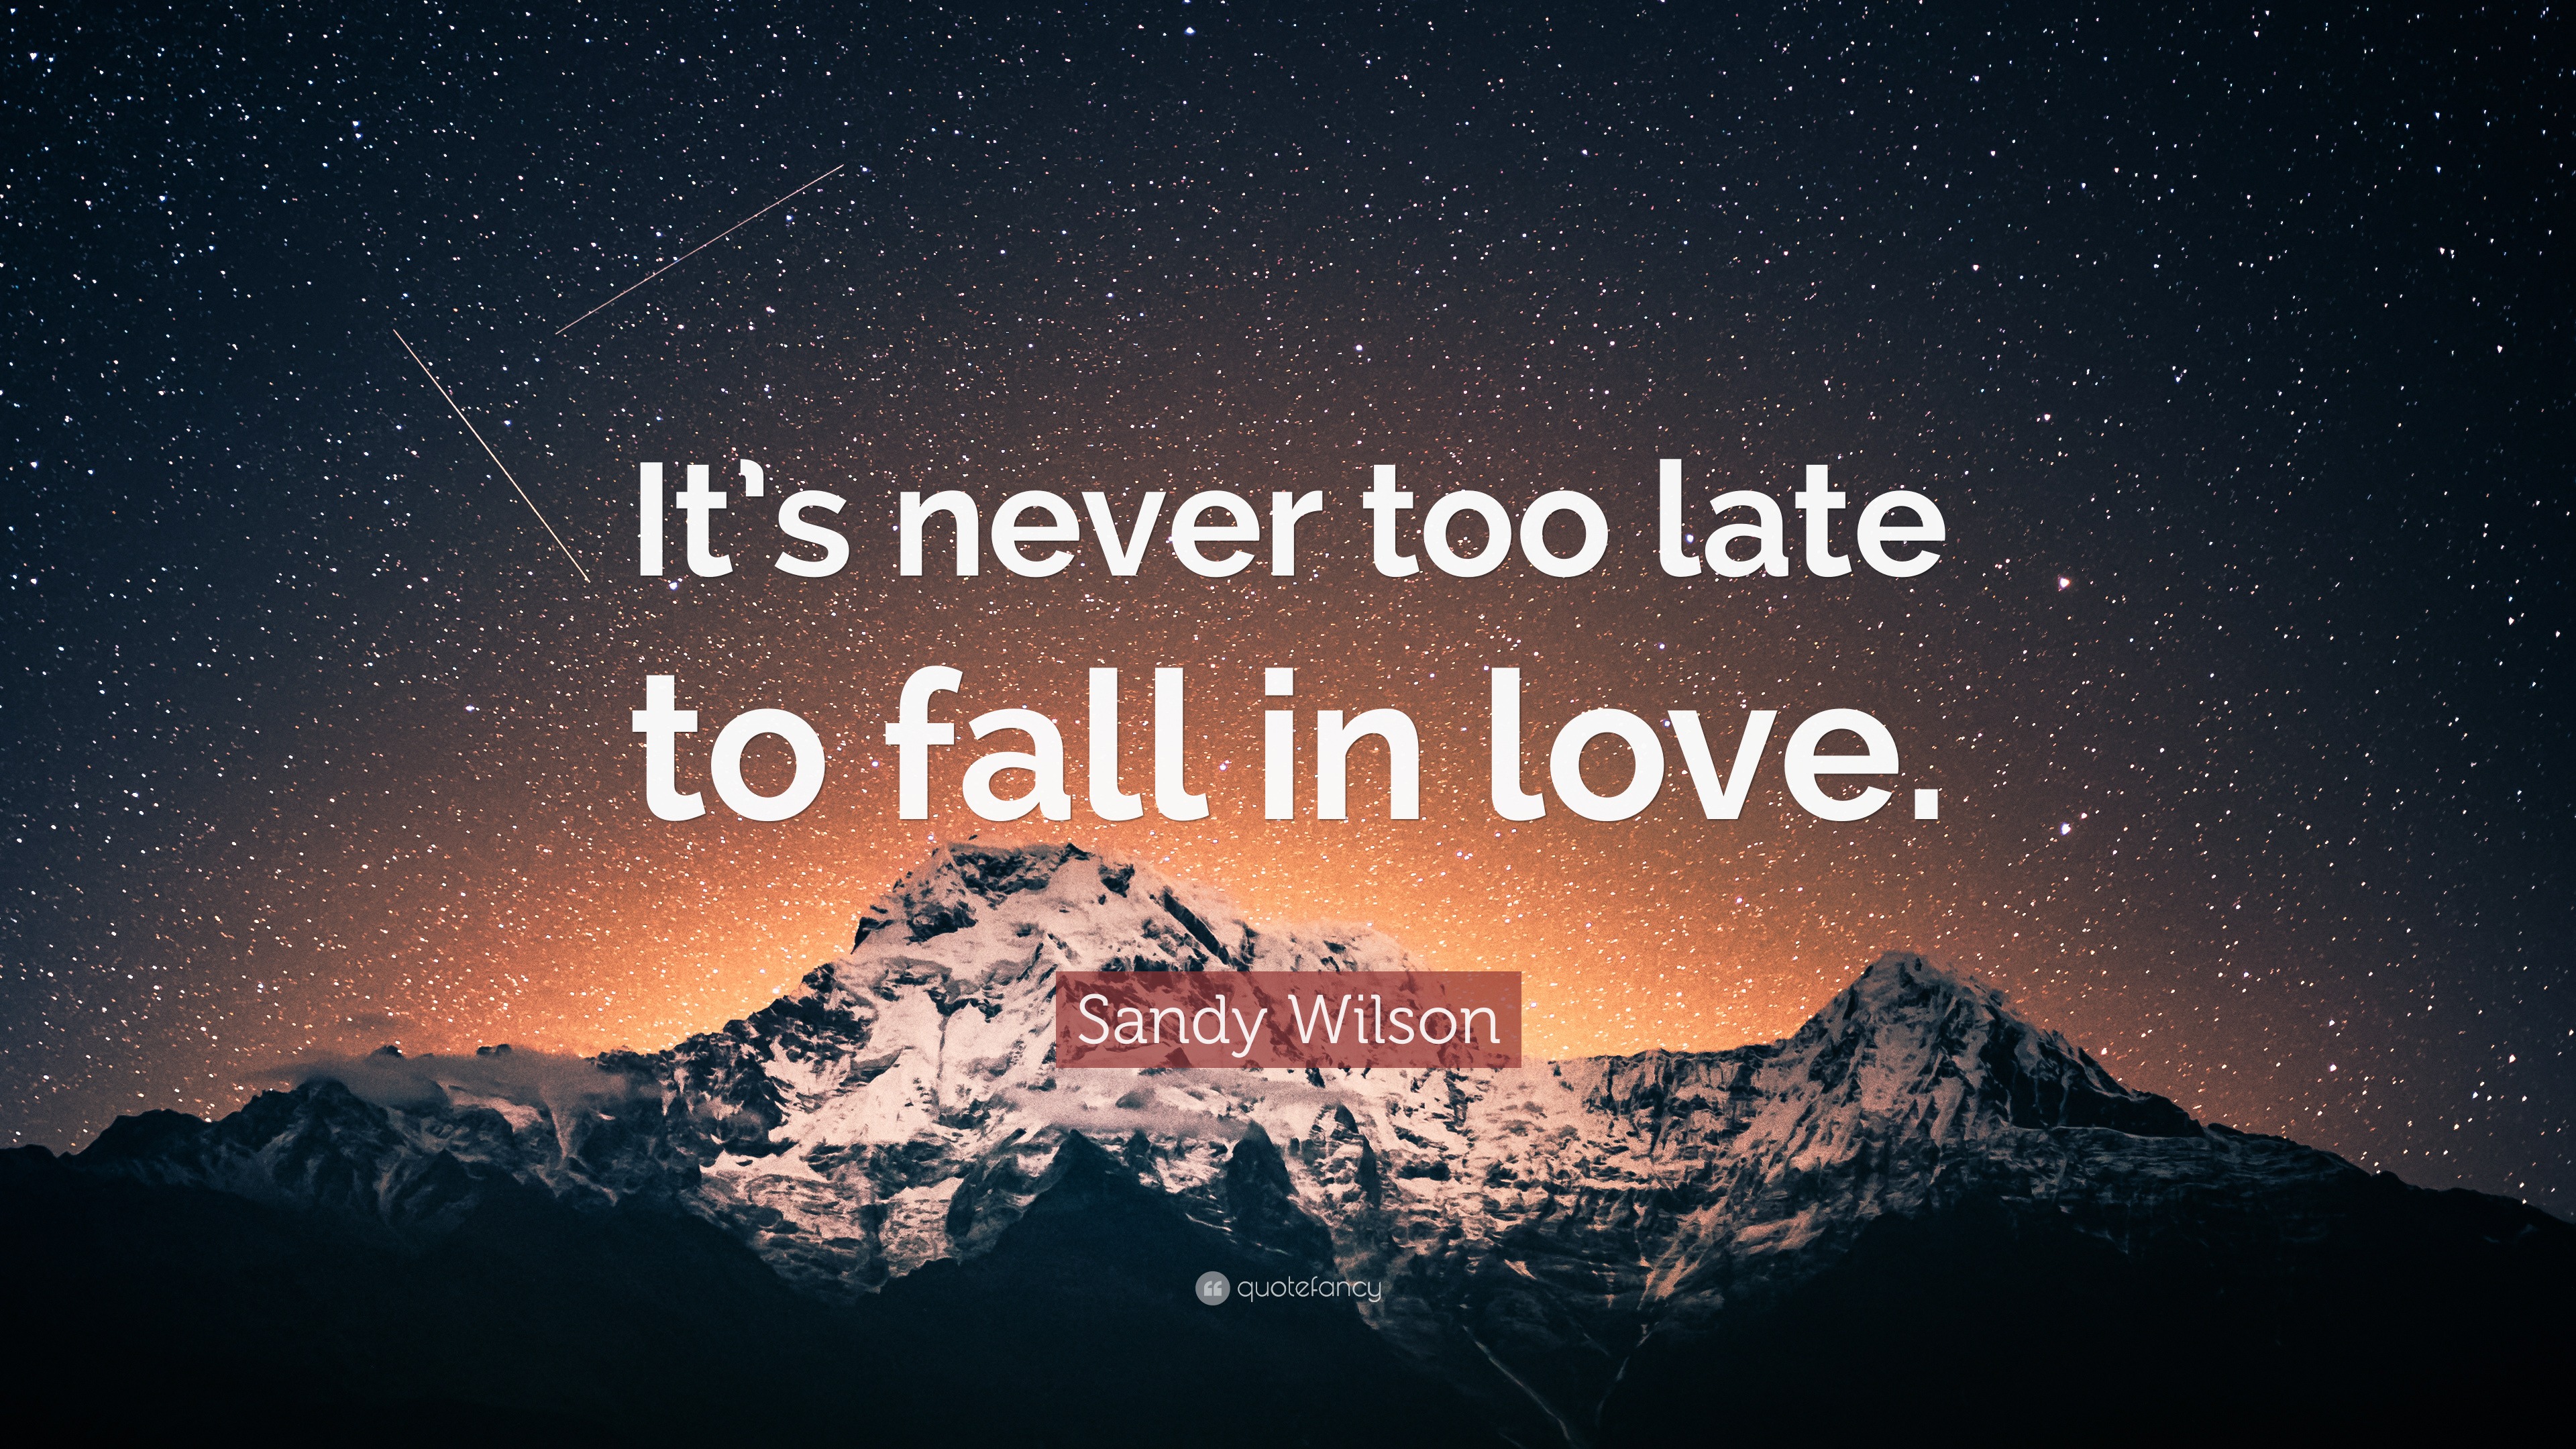 Sandy Wilson Quote “It s never too late to fall in love ”